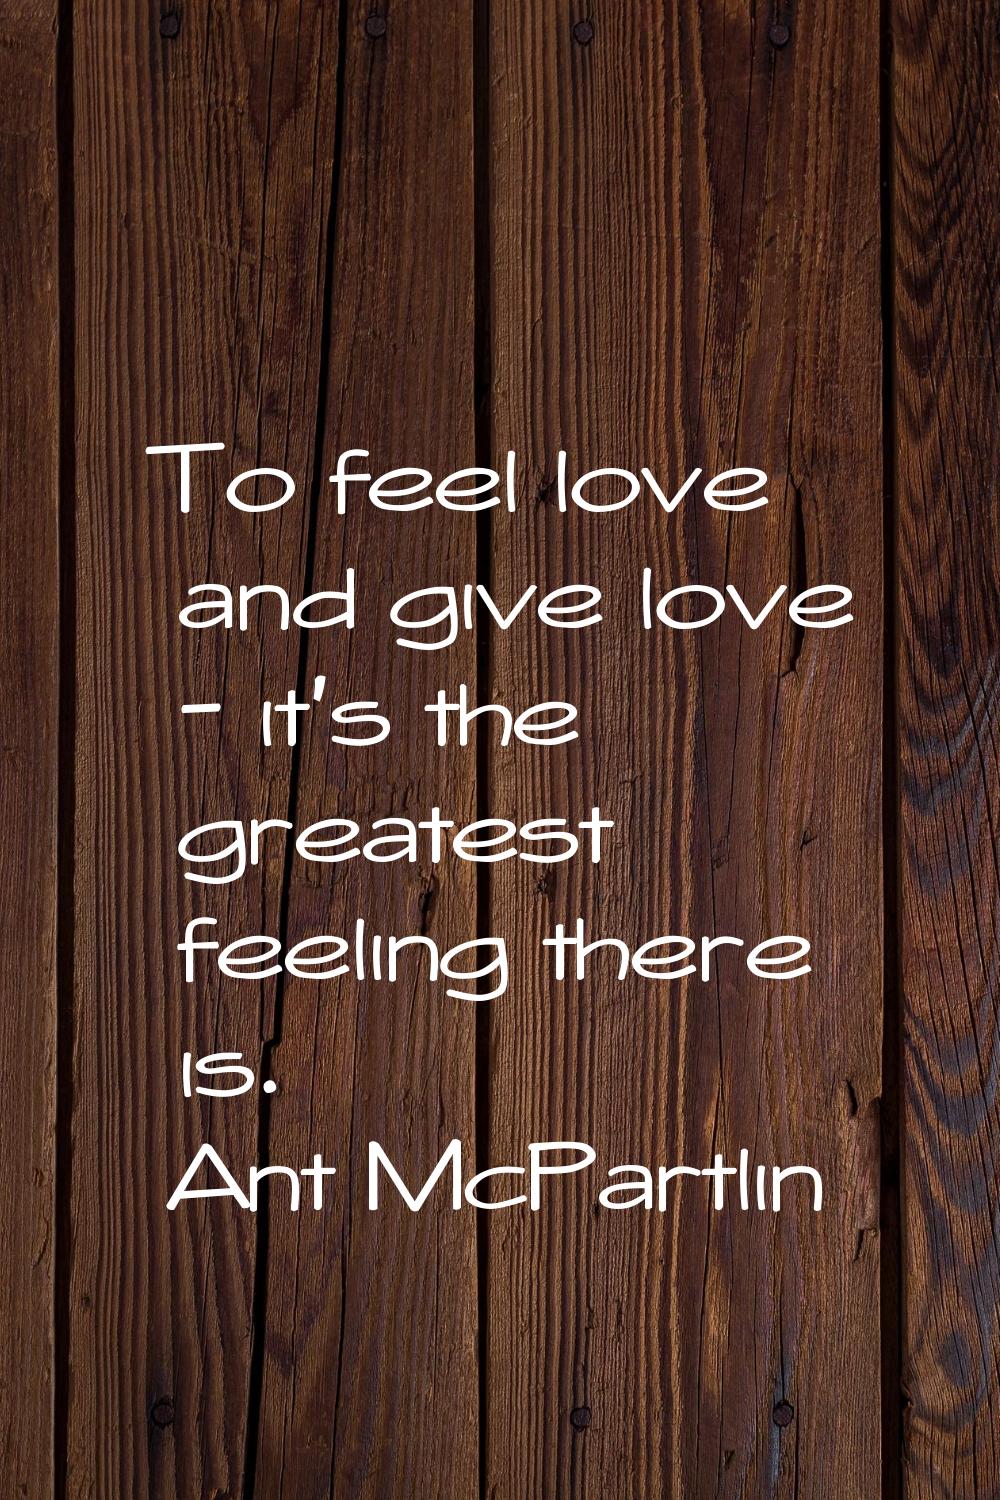 To feel love and give love - it's the greatest feeling there is.